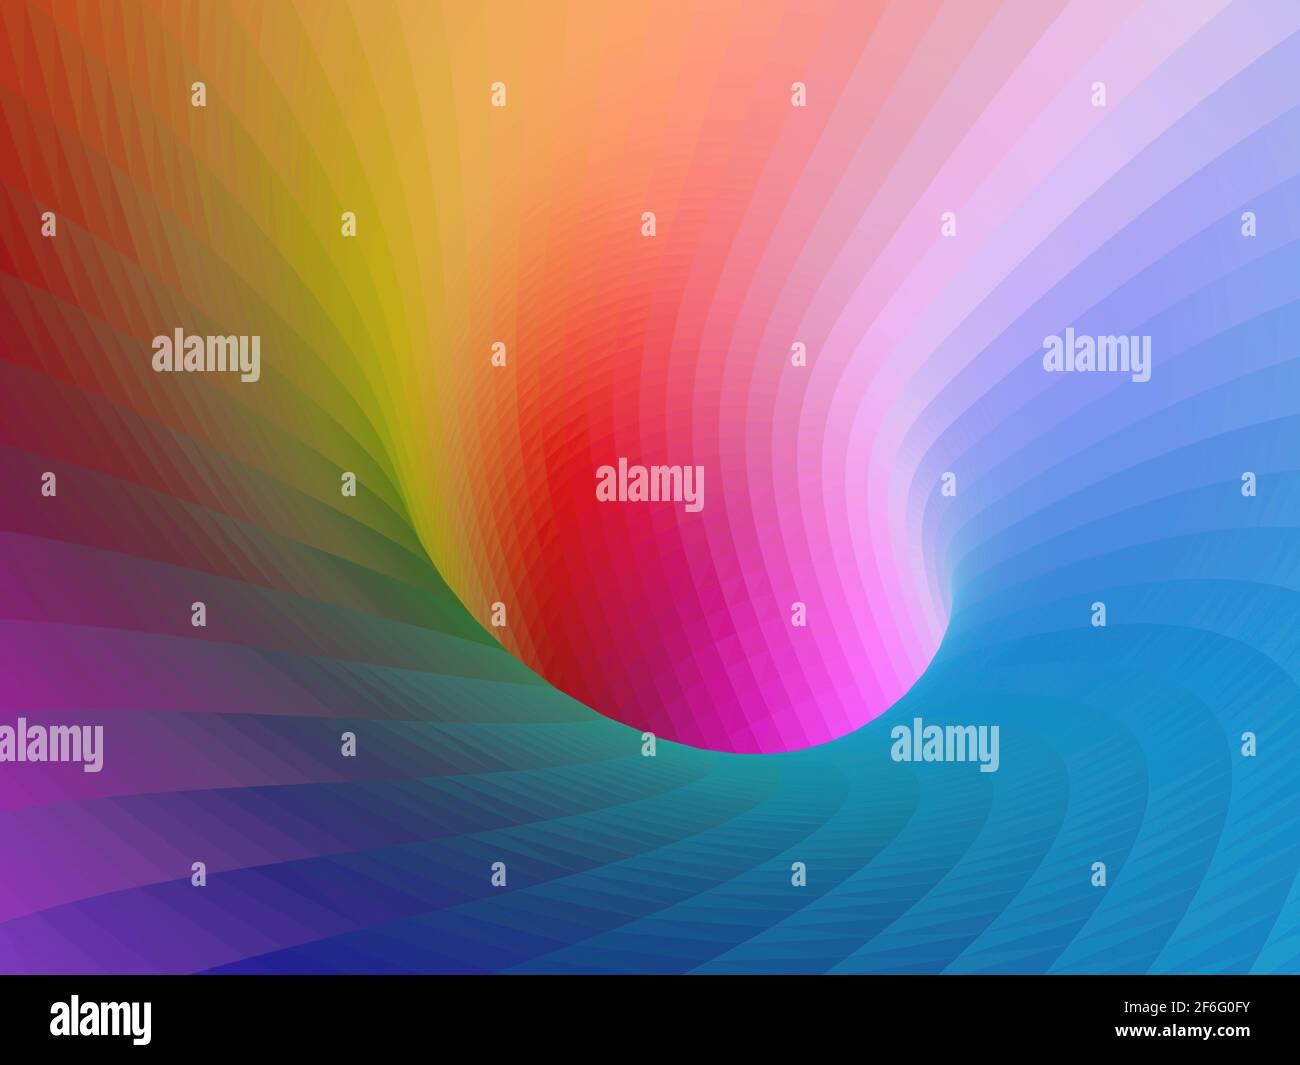 Abstract colorful background, vibrant triangular spectrum tunnel, 3d rendering illustration Stock Photo